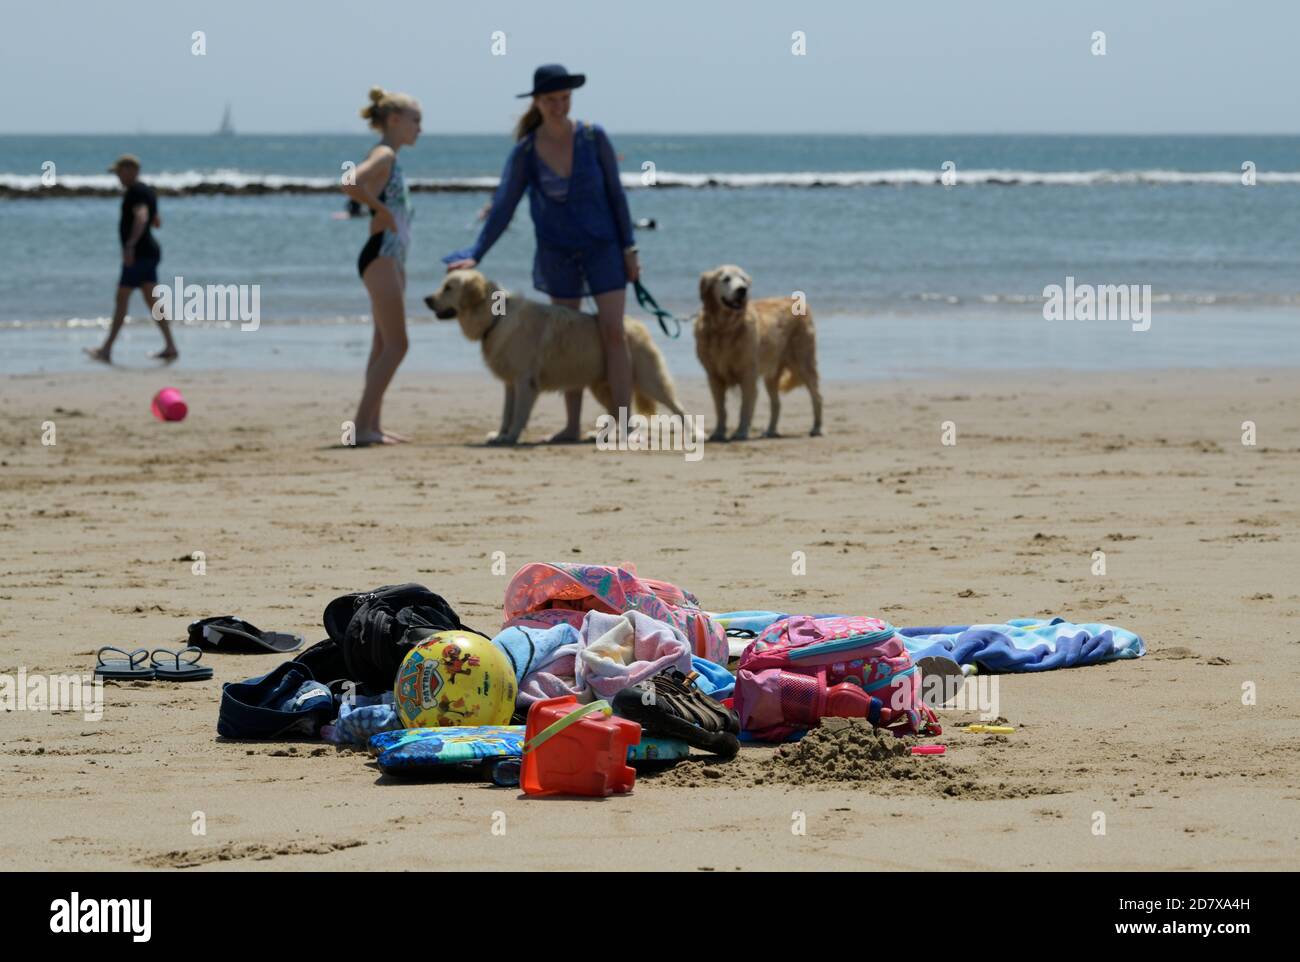 Objects, towels and toys on beach, woman walking dogs, seaside activities, active lifestyle, Durban, South Africa, Golden Mile waterfront, girl Stock Photo